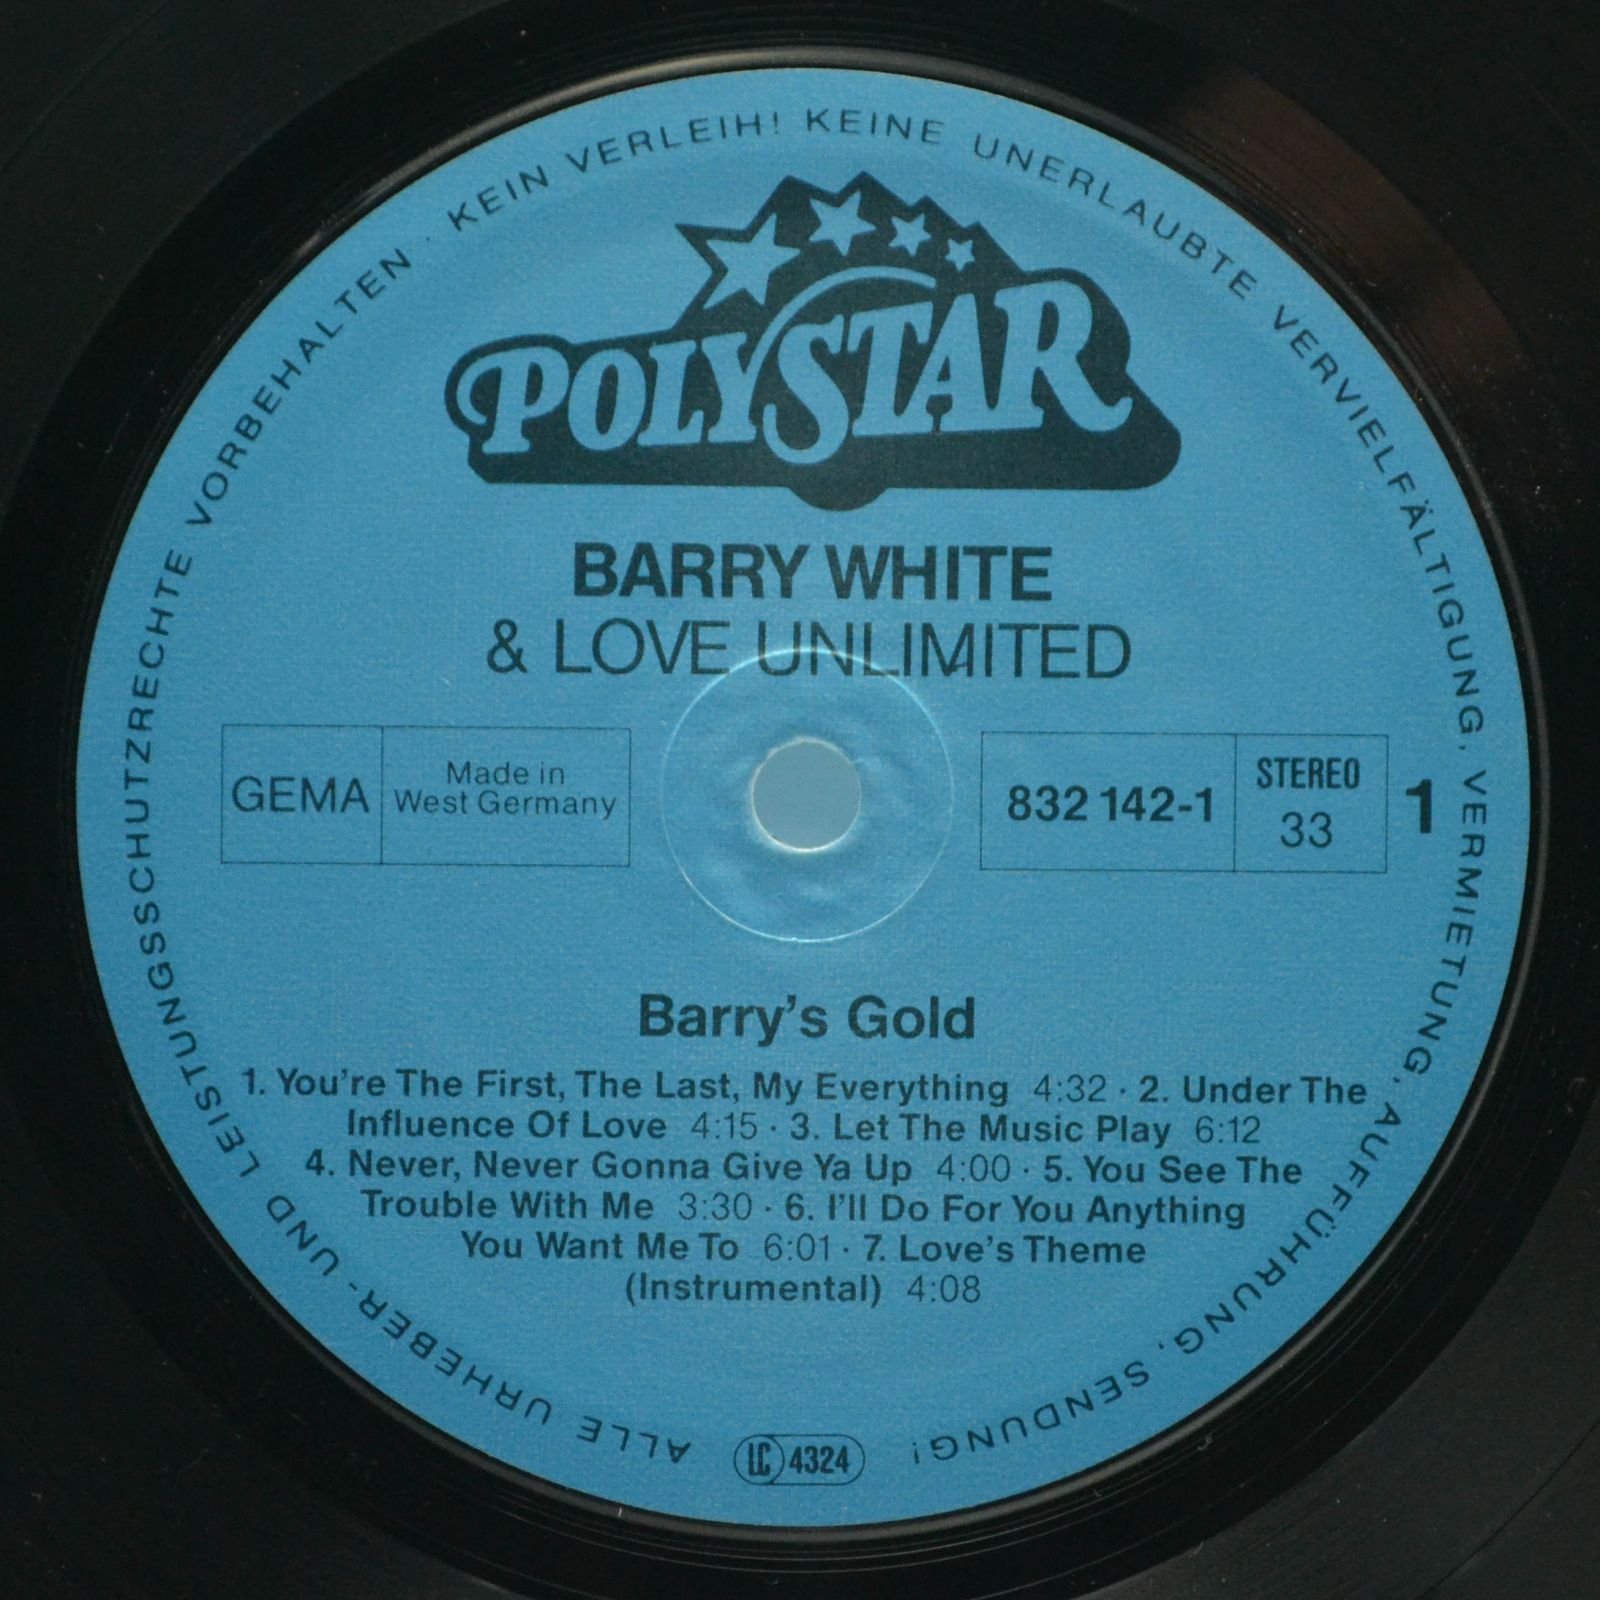 Barry White And Love Unlimited — Barry's Gold, 1988